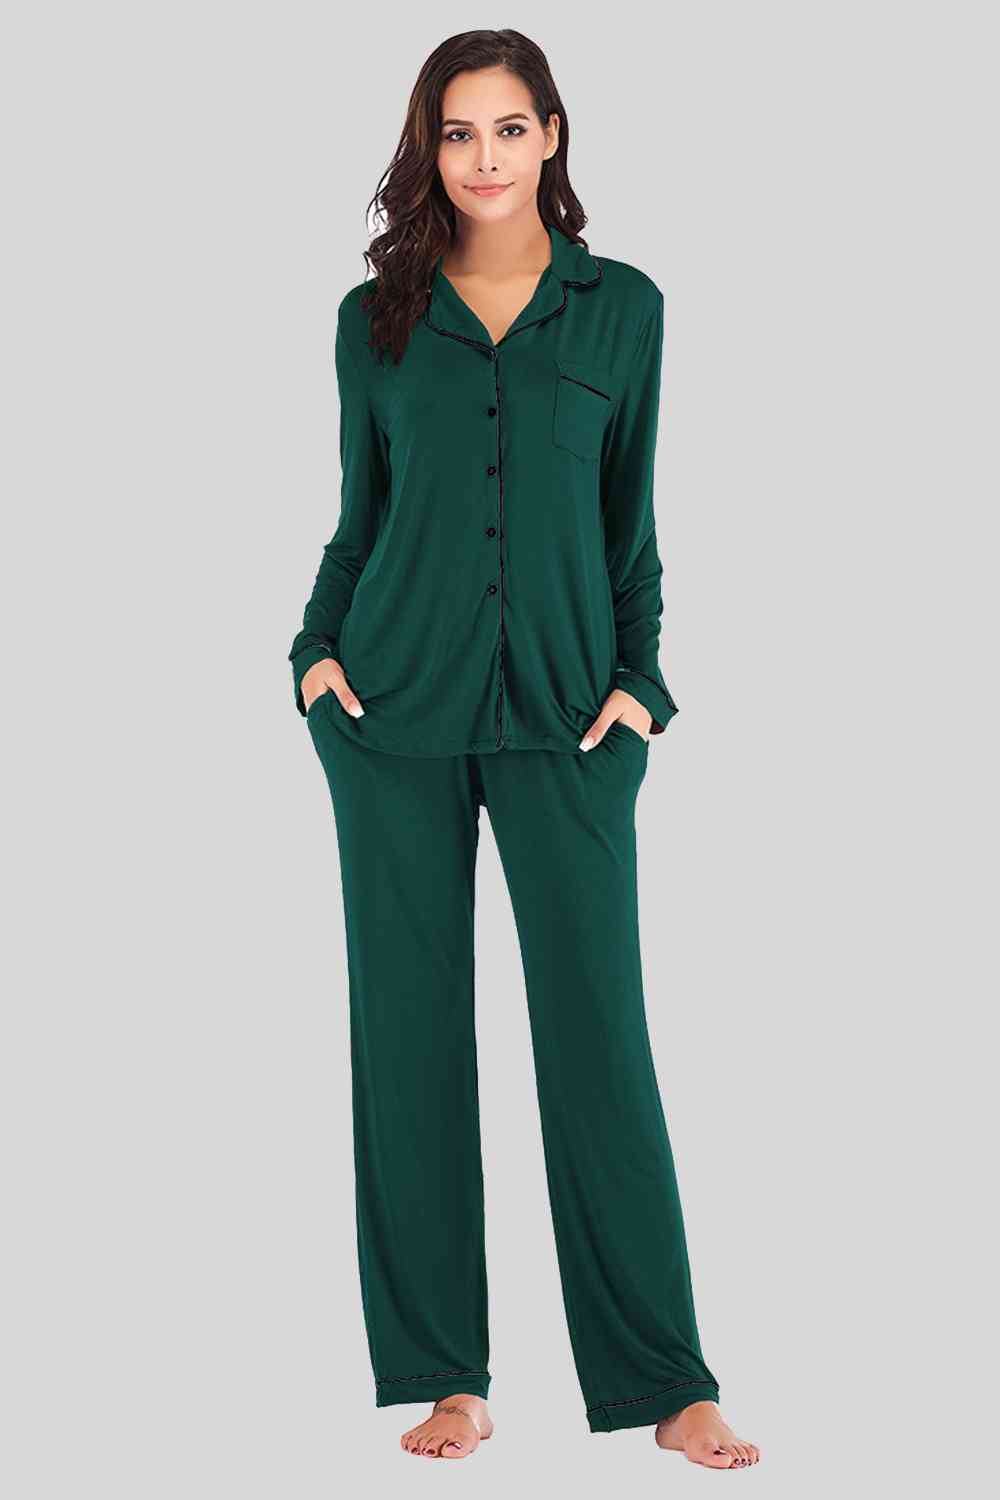 Collared Neck Long Sleeve Loungewear Set with Pockets Green